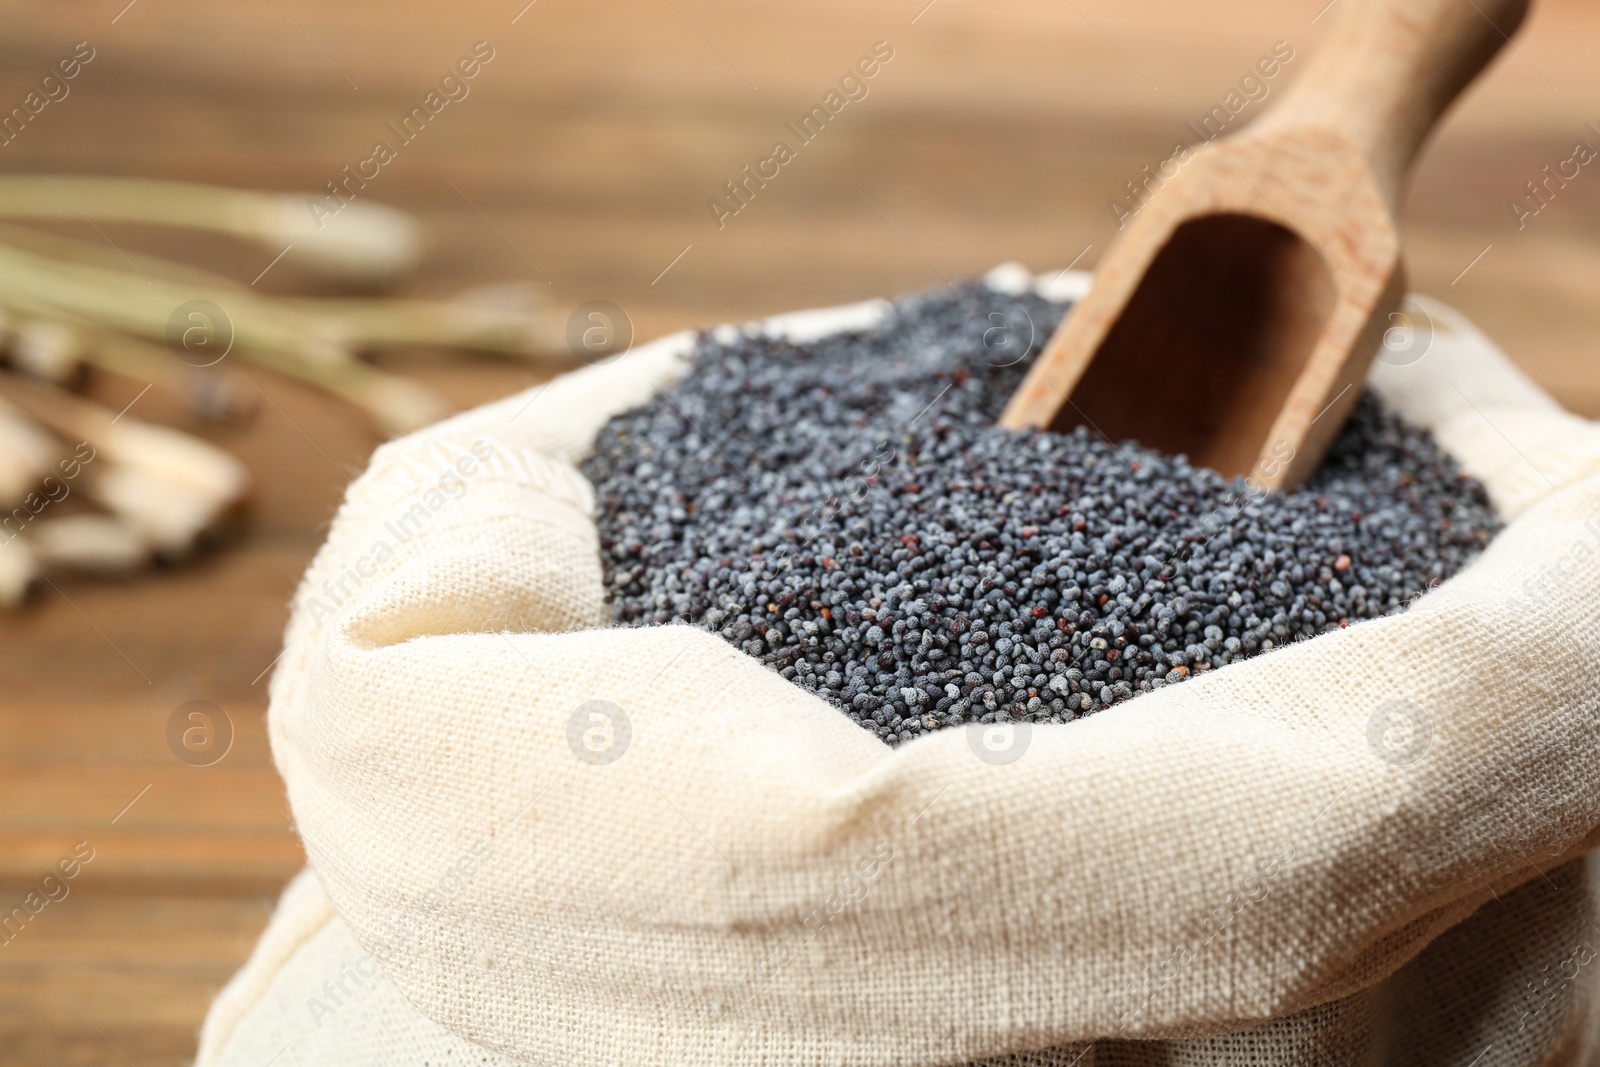 Photo of Poppy seeds and wooden scoop in sack on table, closeup